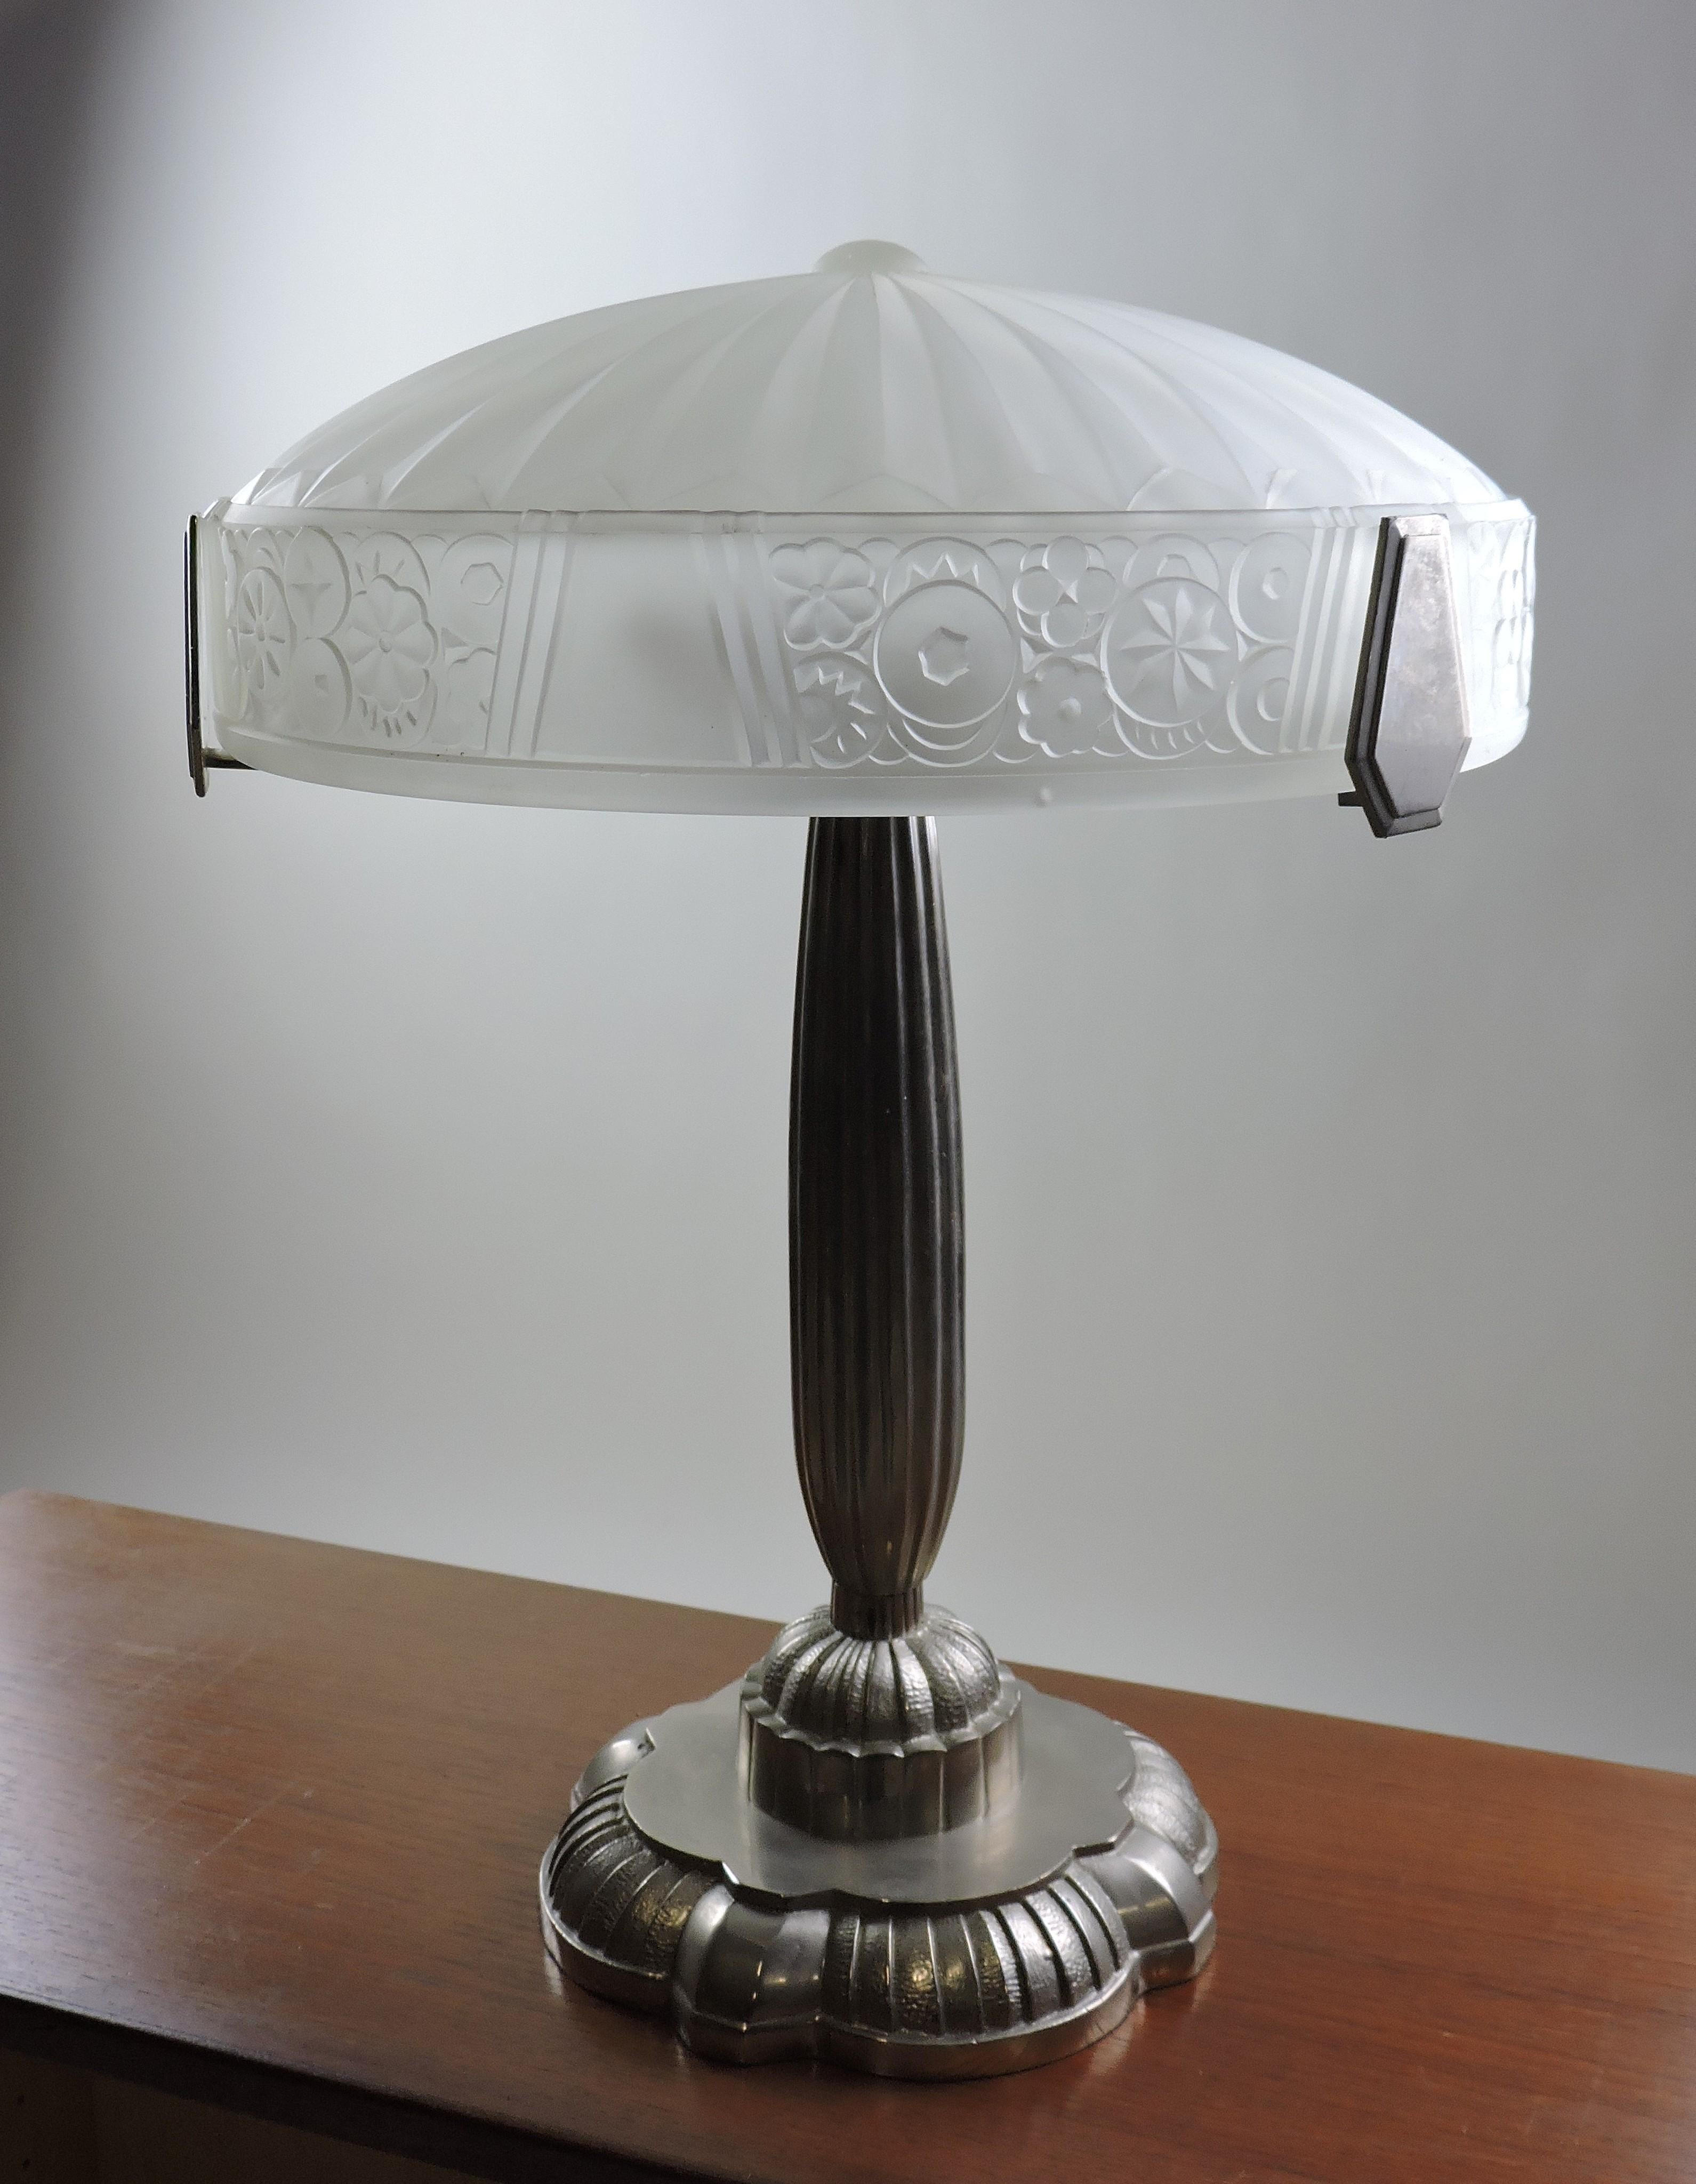 Beautiful French Art Deco table lamp with a etched glass shade that has a lovely stylized floral and geometric design resting on a nickel-plated base. A very high quality reproduction, it has European bulb sockets that have adapters so that it can